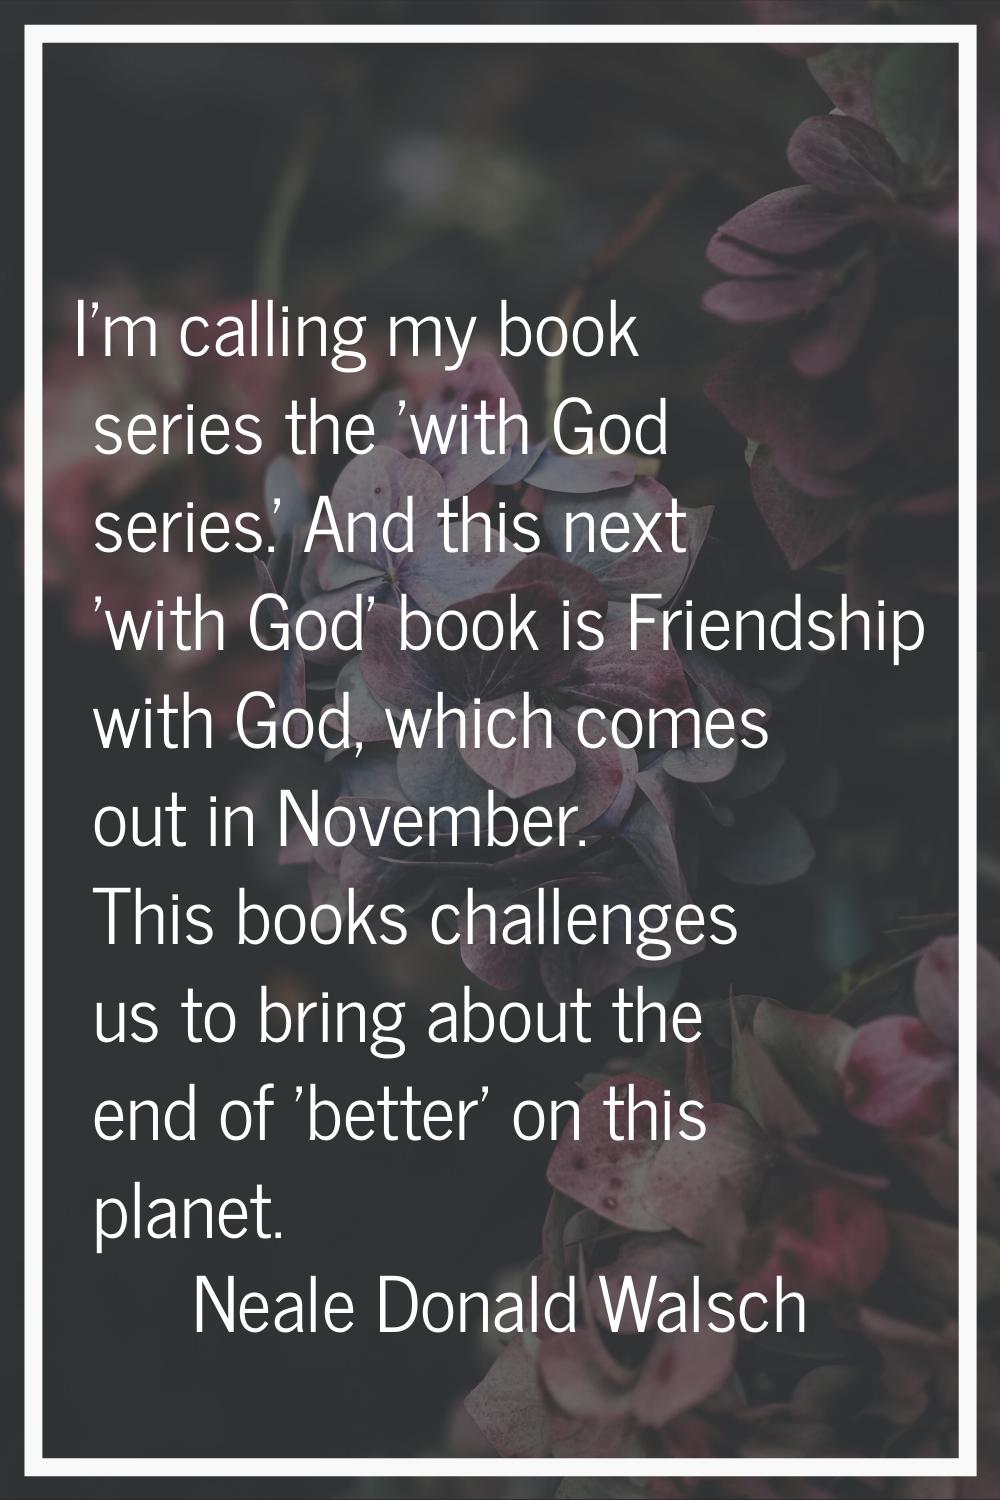 I'm calling my book series the 'with God series.' And this next 'with God' book is Friendship with 